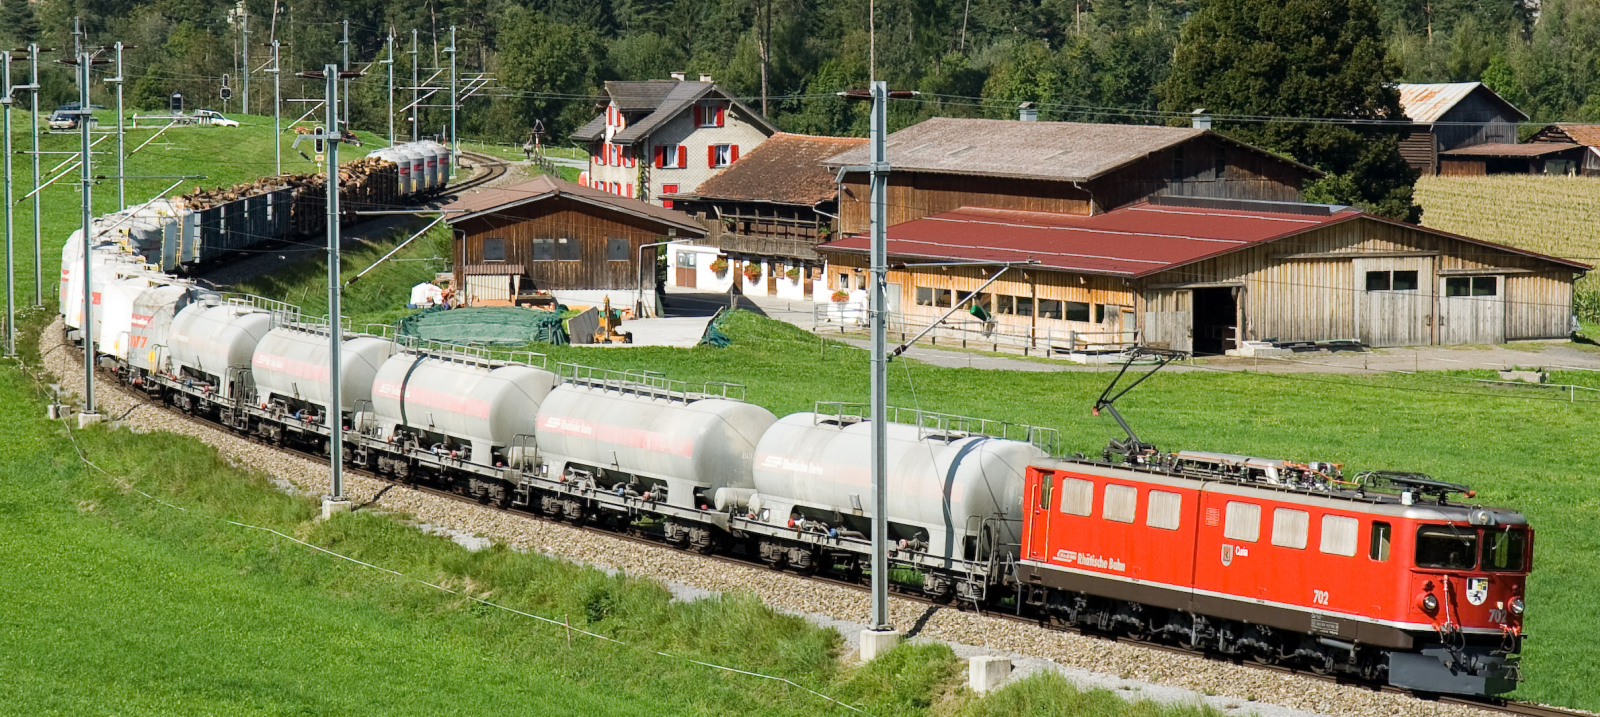 No. 702 with a 27-car freight train in September 2008 near Ilanz